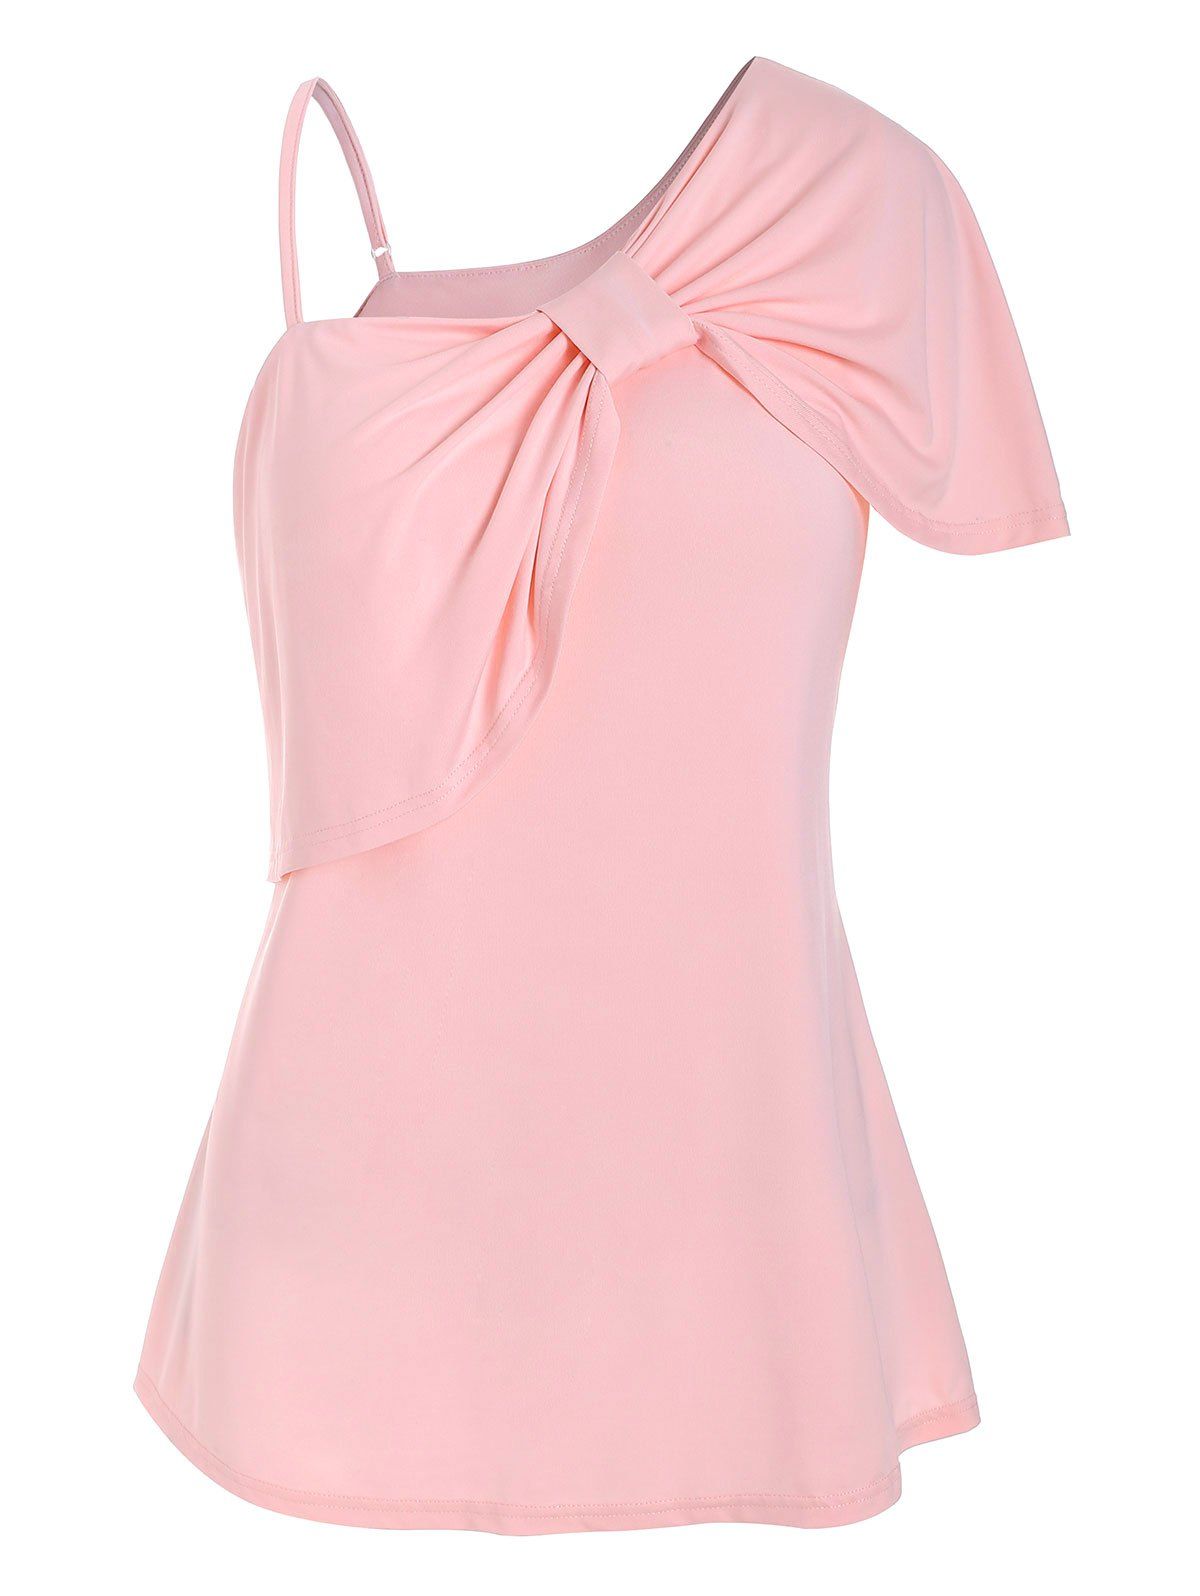 Plus Size Ruffled Front Knot T Shirt - PINK 1X